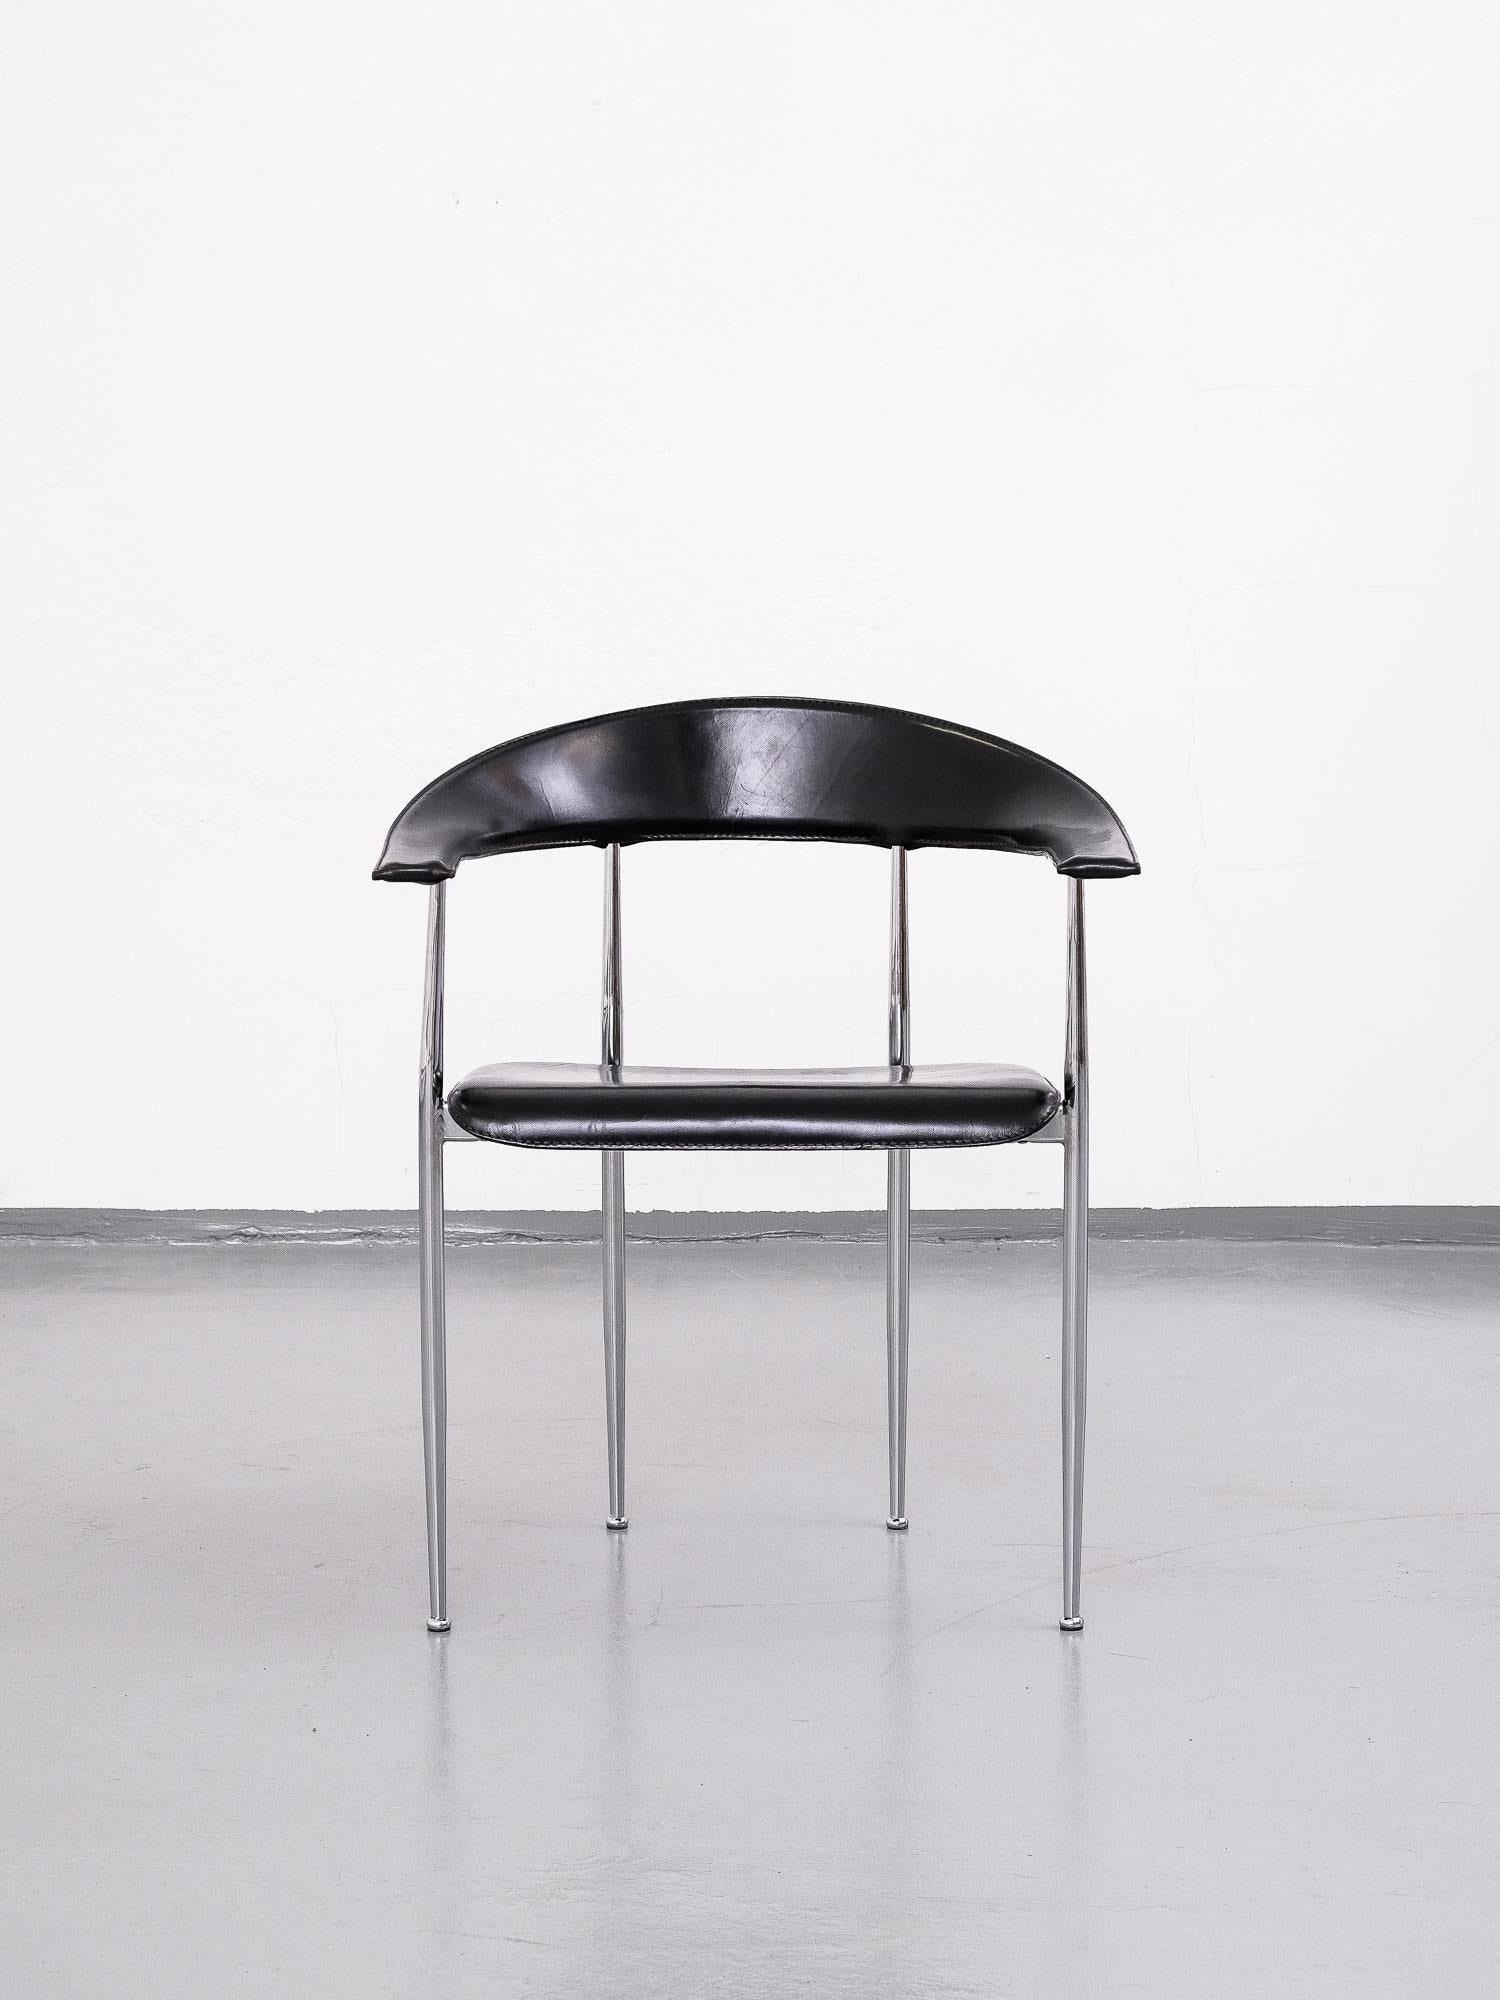 P40 armchair was designed by Giancarlo Vegni & Gianfranco Gualtierotti for Fasem in Italy, circa 1980.
The seat and armrest are upholstered in a high quality black leather. Very sturdy chromed tubular steel base.